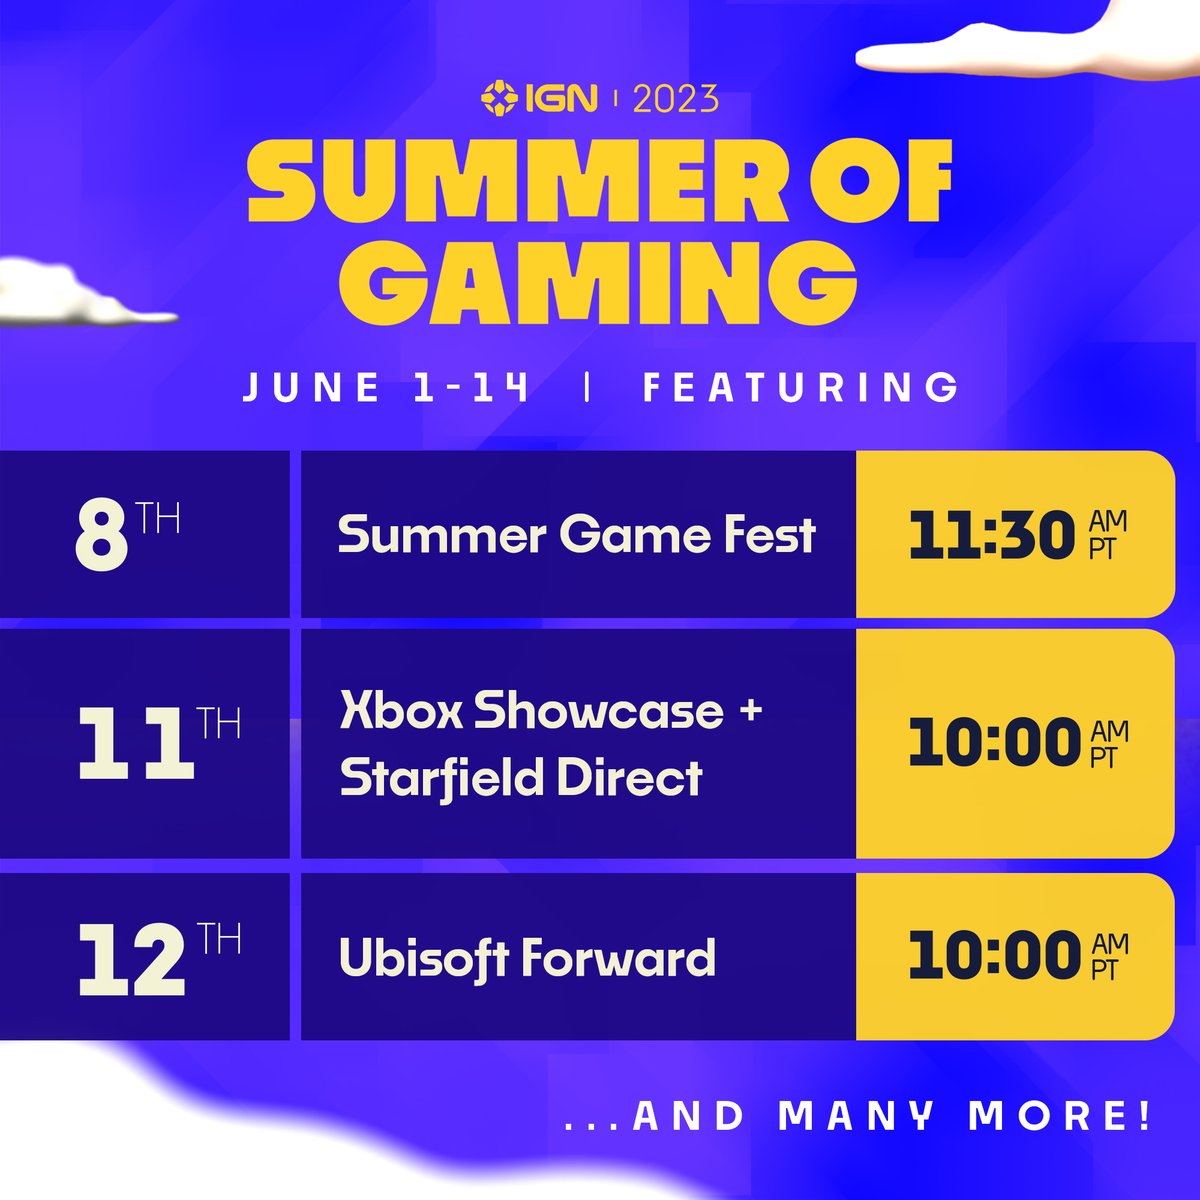 Things are starting to pick up as the Summer of Gaming begins! Stay tuned to #IGNSummerOfGaming for all of our coverage. bit.ly/3MviR3b